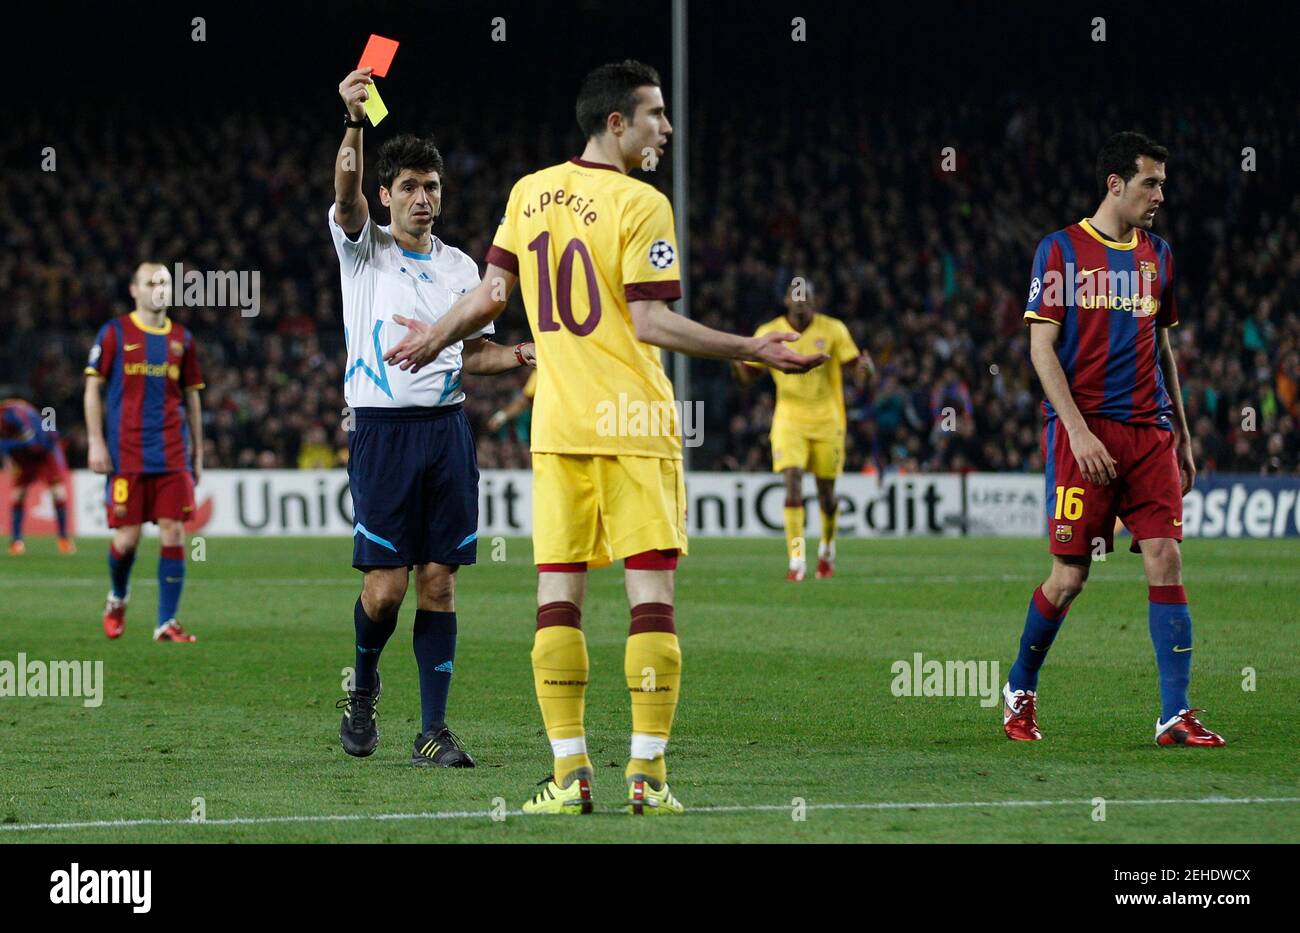 Football - FC Barcelona v Arsenal UEFA Champions League Second Round Leg - The Nou Camp, Barcelona, Spain - 10/11 - 8/3/11 Arsenal's Robin van Persie is shown a red card